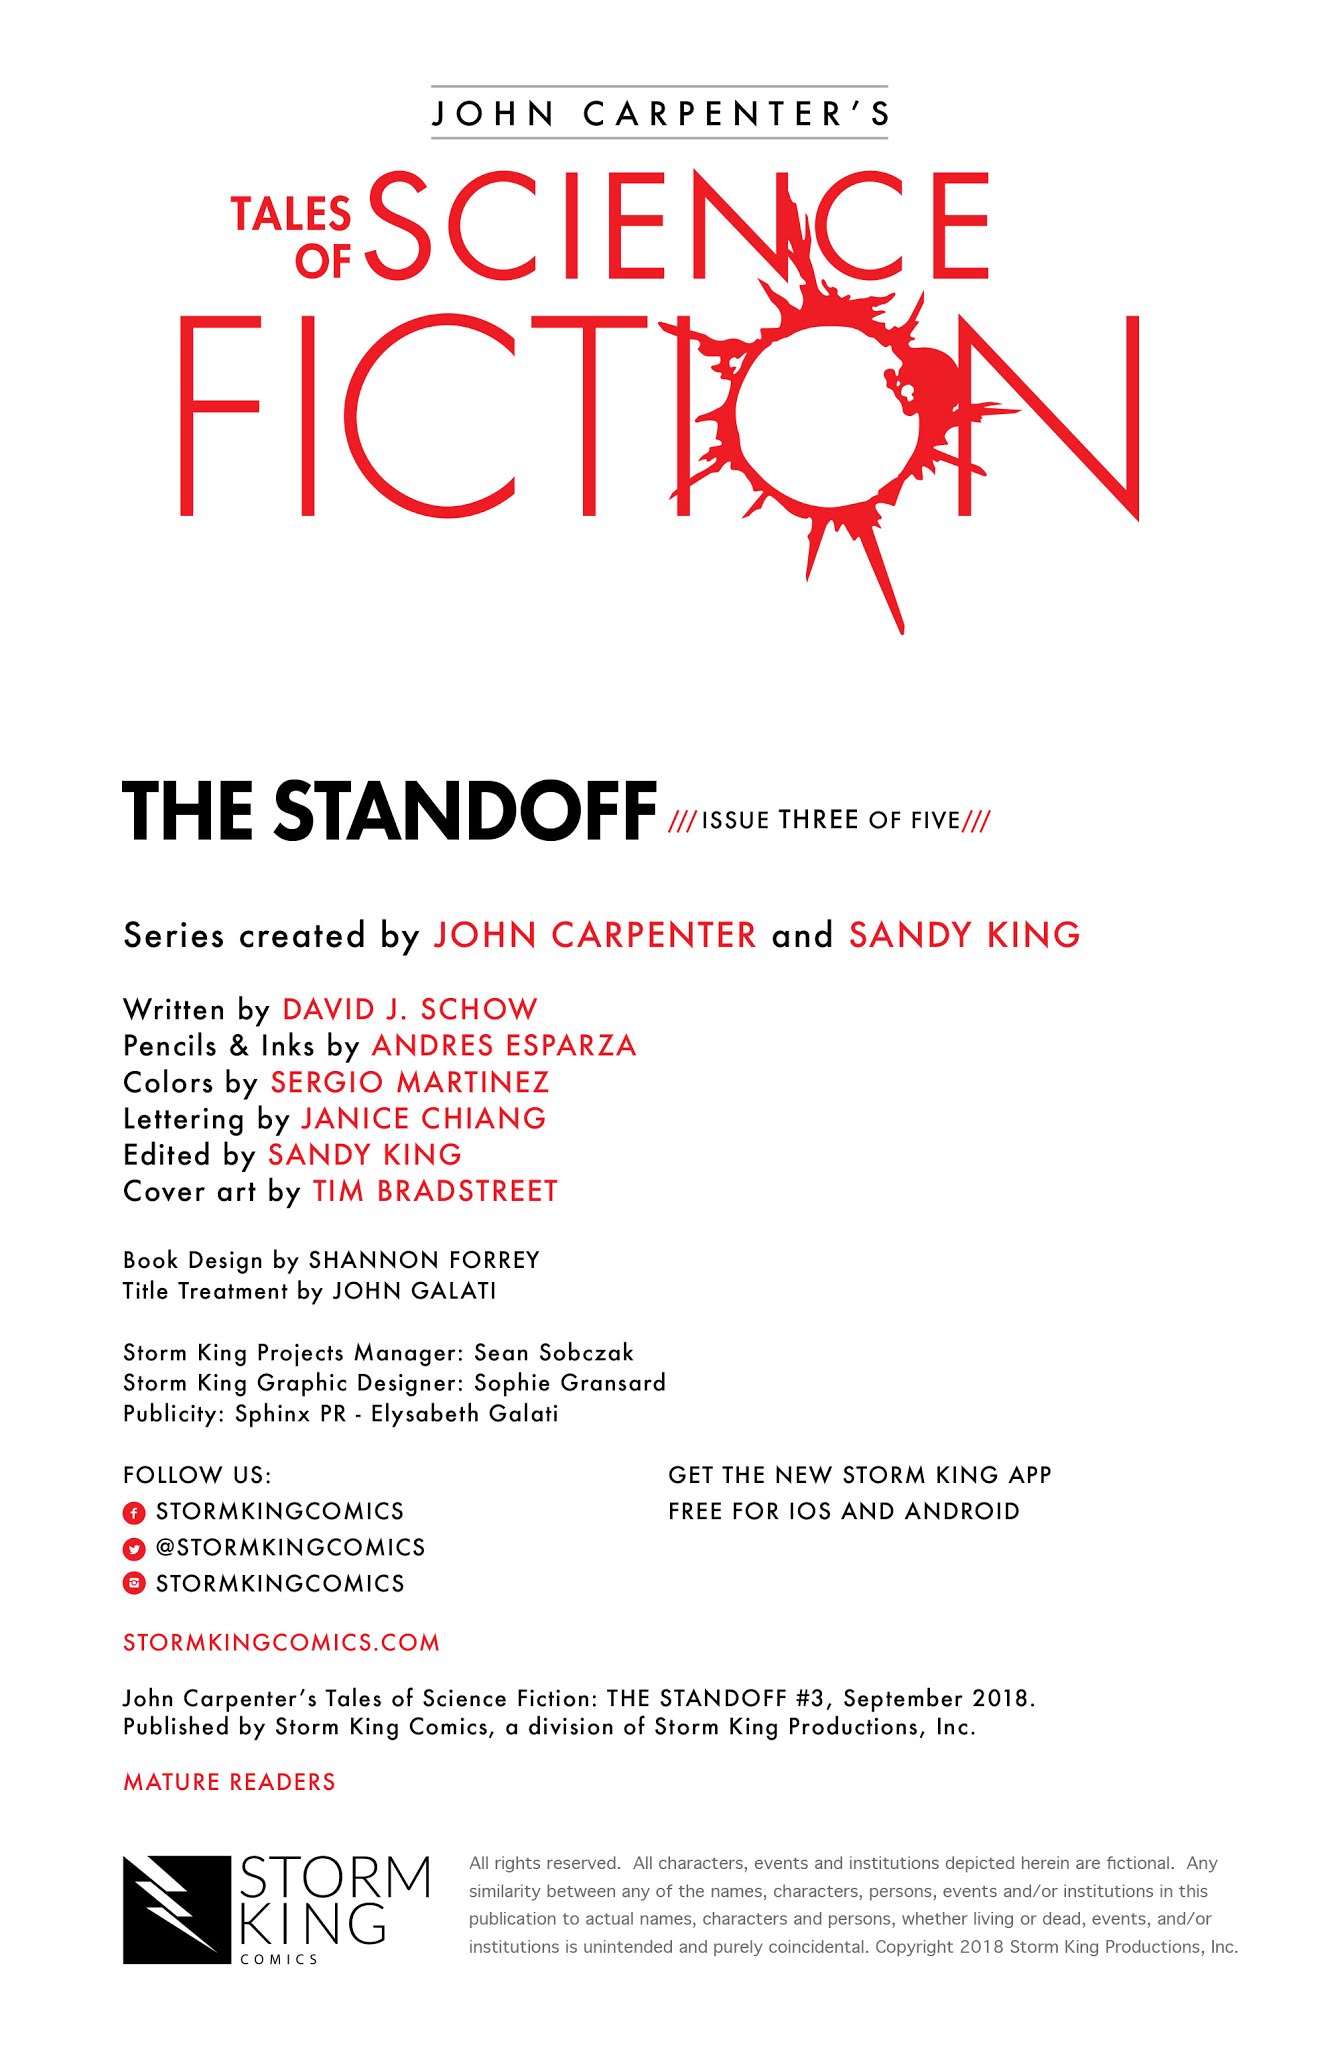 Read online John Carpenter's Tales of Science Fiction: The Standoff comic -  Issue #3 - 2